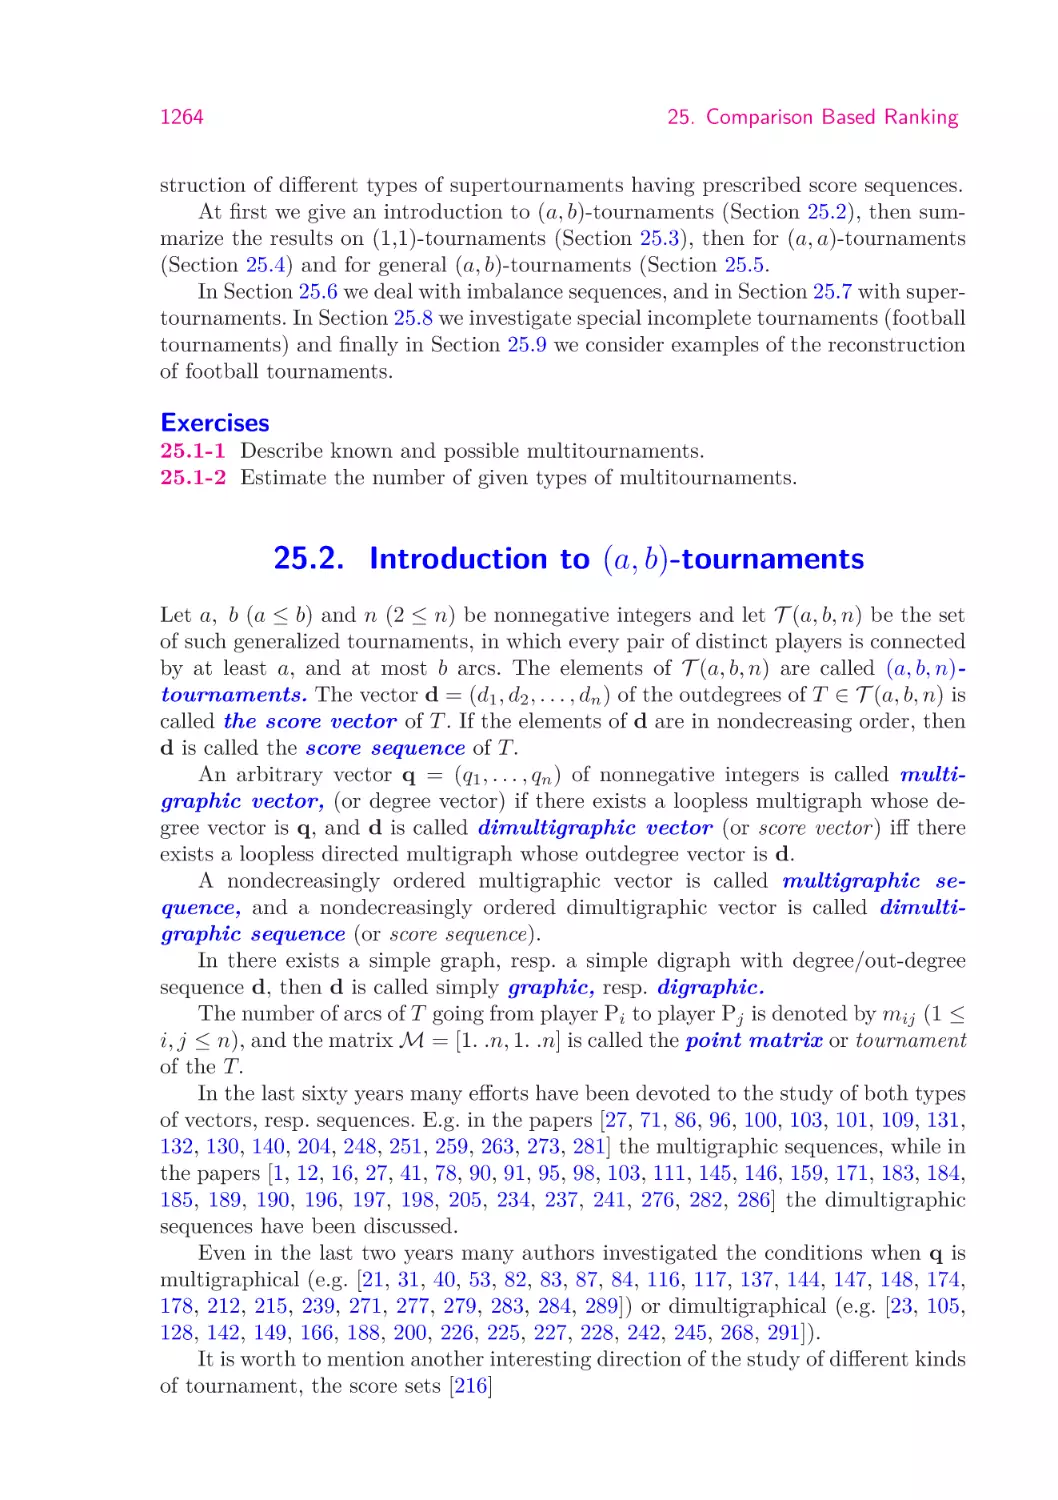 25.2.  Introduction to (a,b)-tournaments